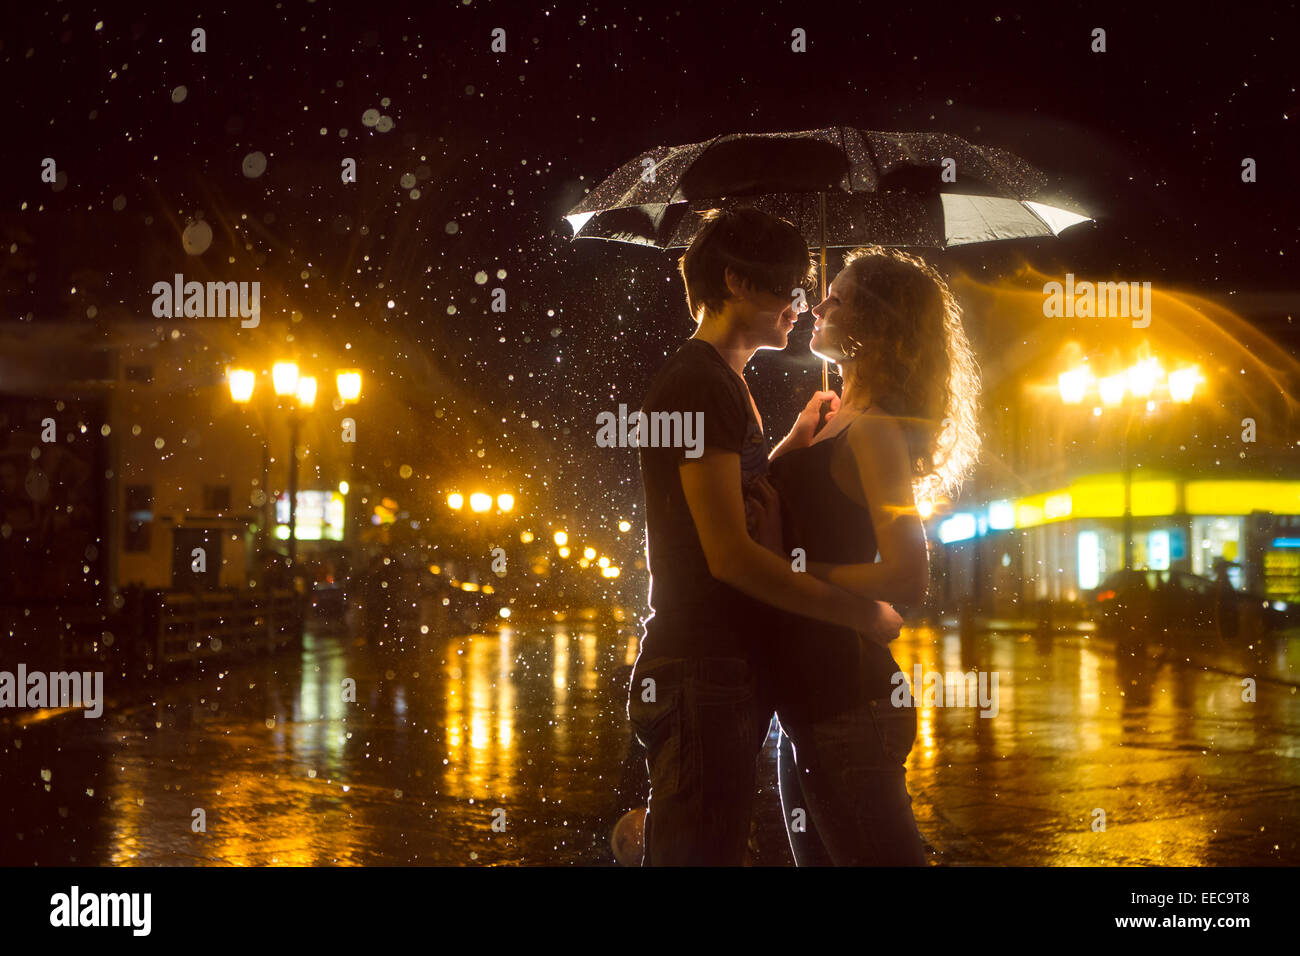 The girl with the boy kissing under a rain Stock Photo - Alamy